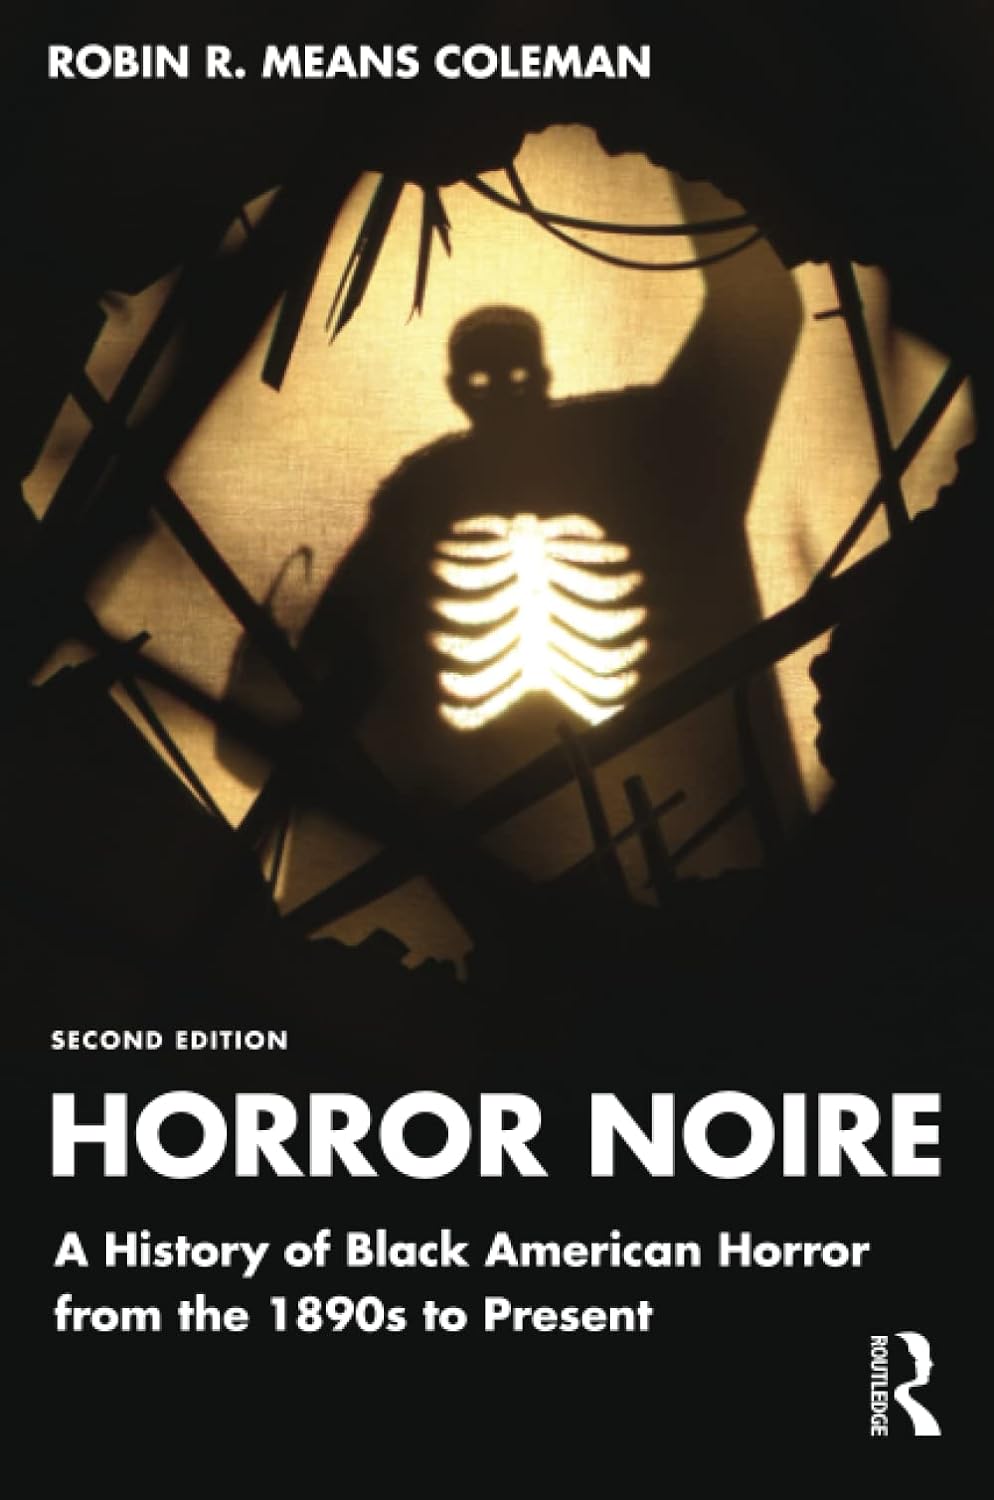 Horror Noire: A History of Black American Horror from the 1890s to Present